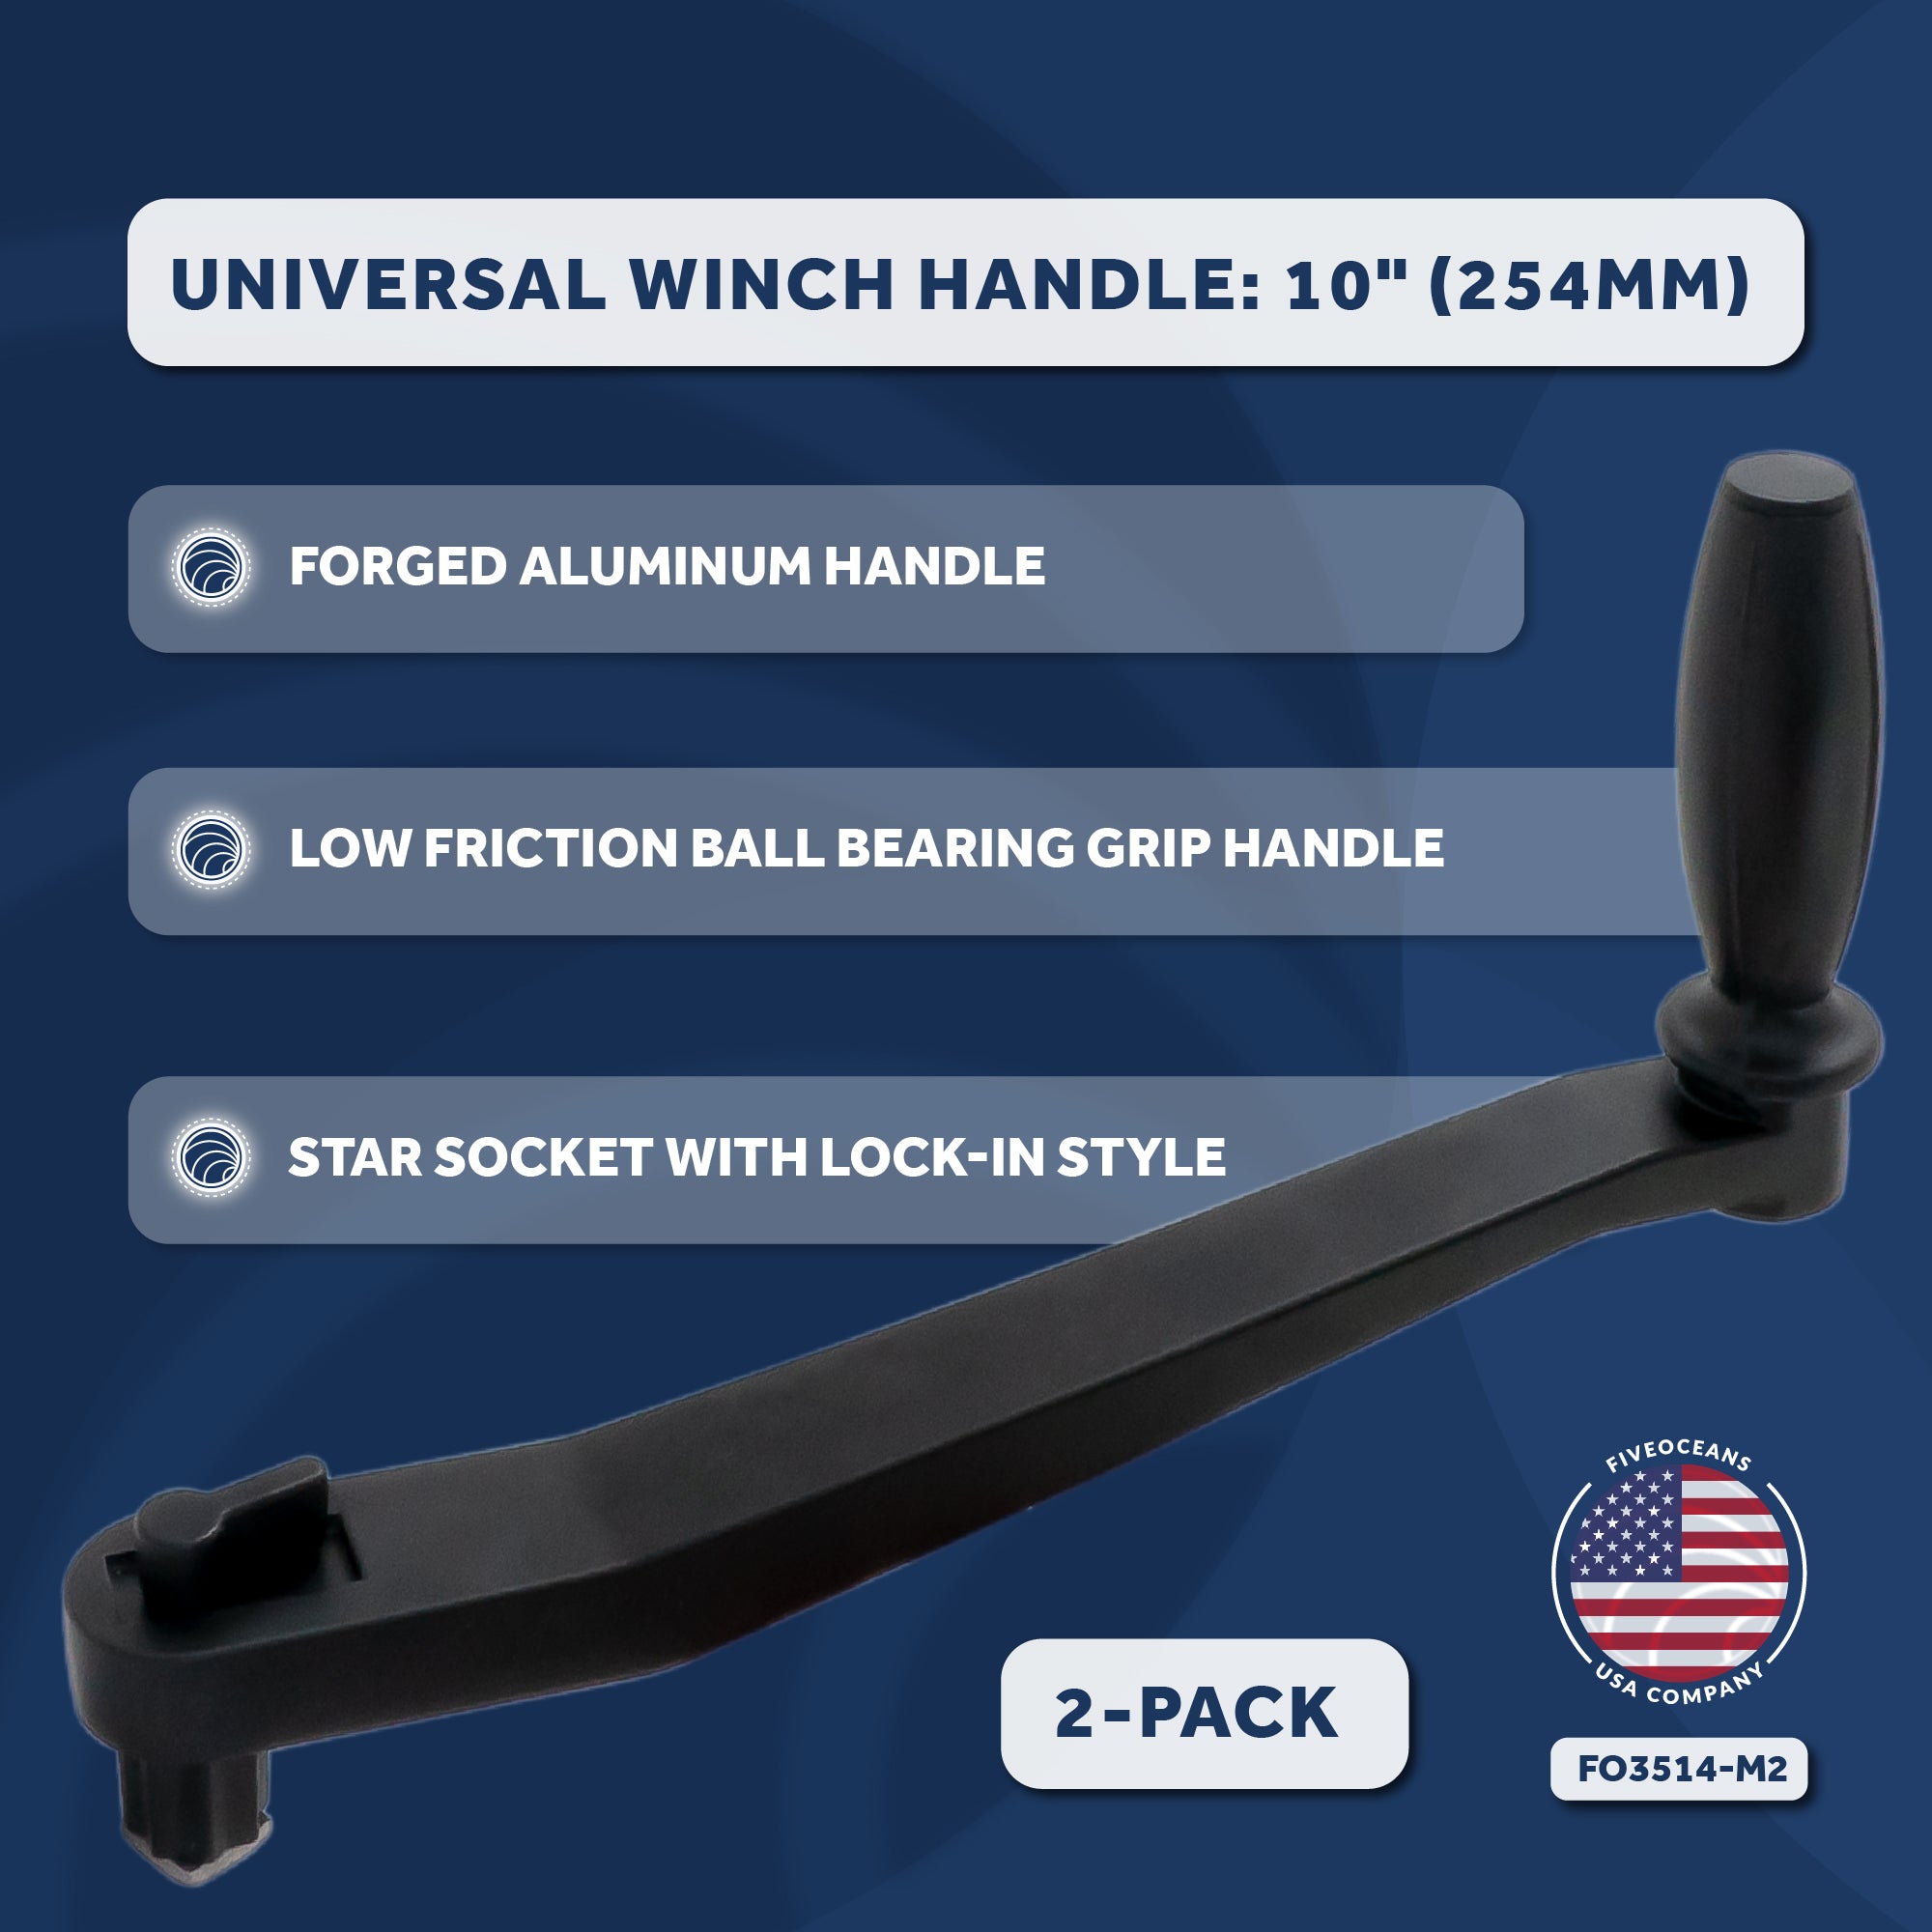 Universal Lock-in Style Winch Handle 10", 2-Pack - FO3514-M2